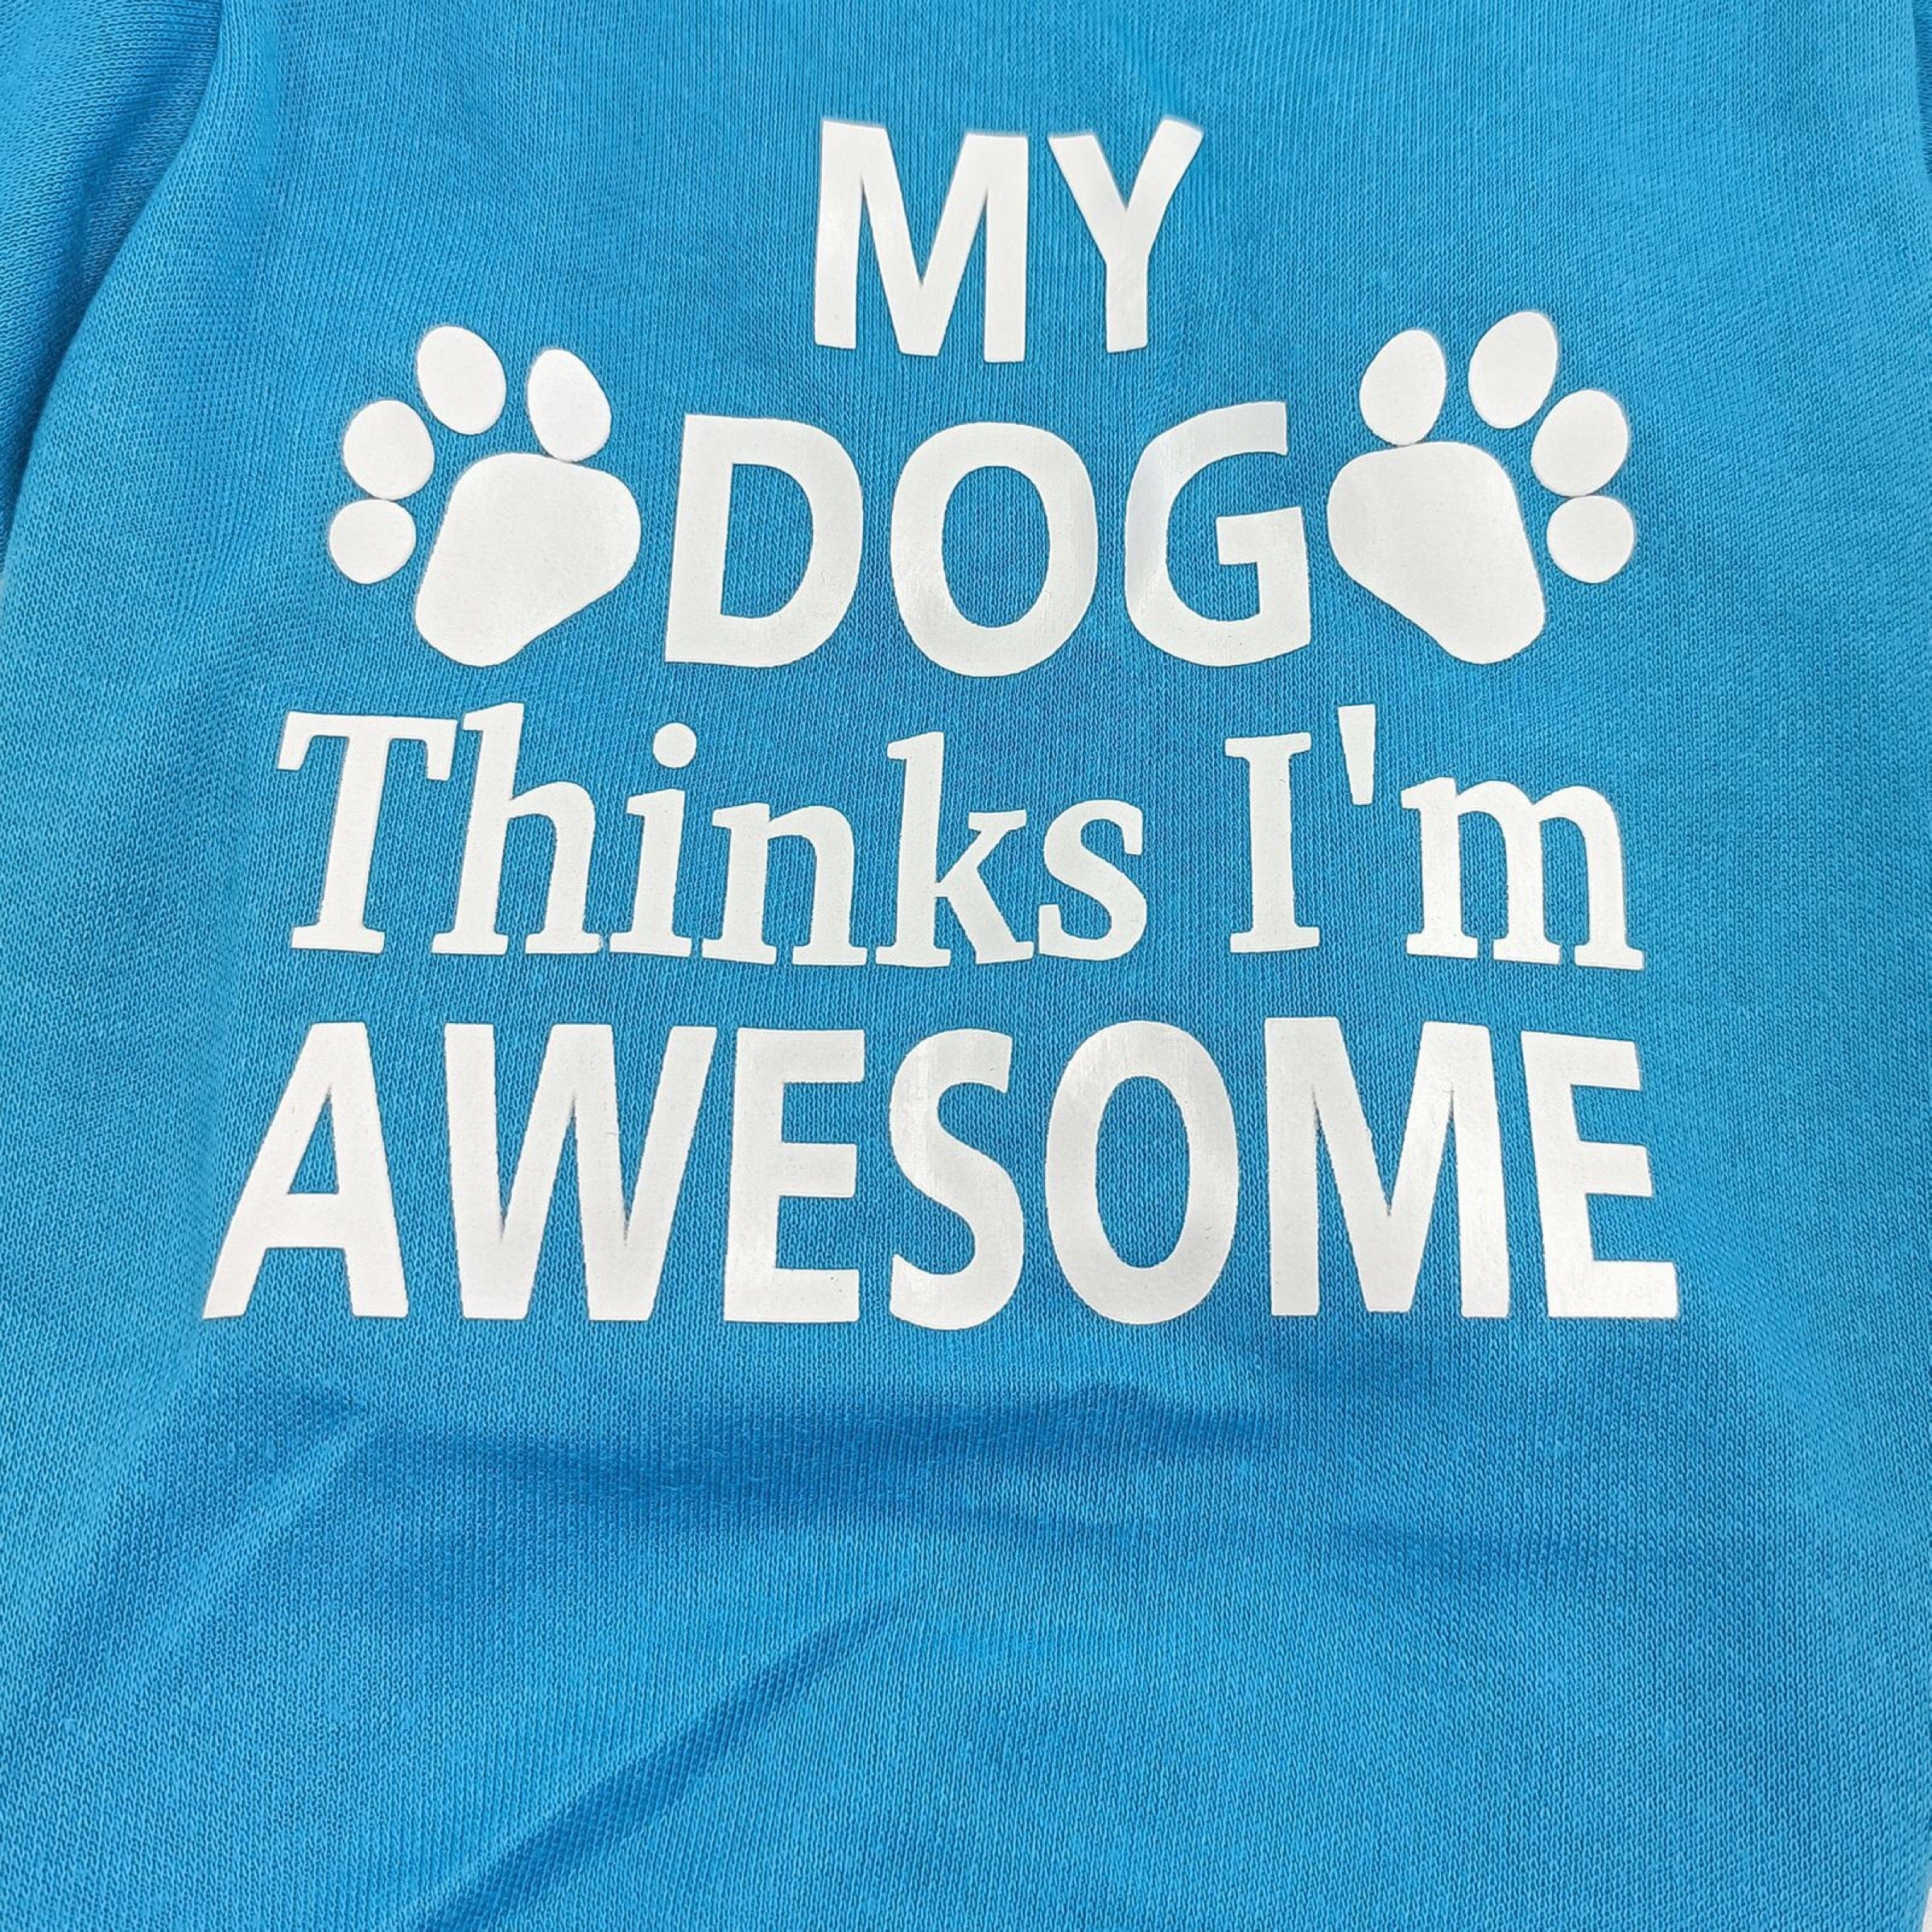 KUTKUT Small Dog & Cat T Shirt | Breathable I'm Awesome Printed Half Sleeves Tee Shirt for Small Dogs Chihuahua, Yorkie Shih Tzu (Blue, Size: L, Chest Girth 46 cm, Back Length 36 cm) - kutkut